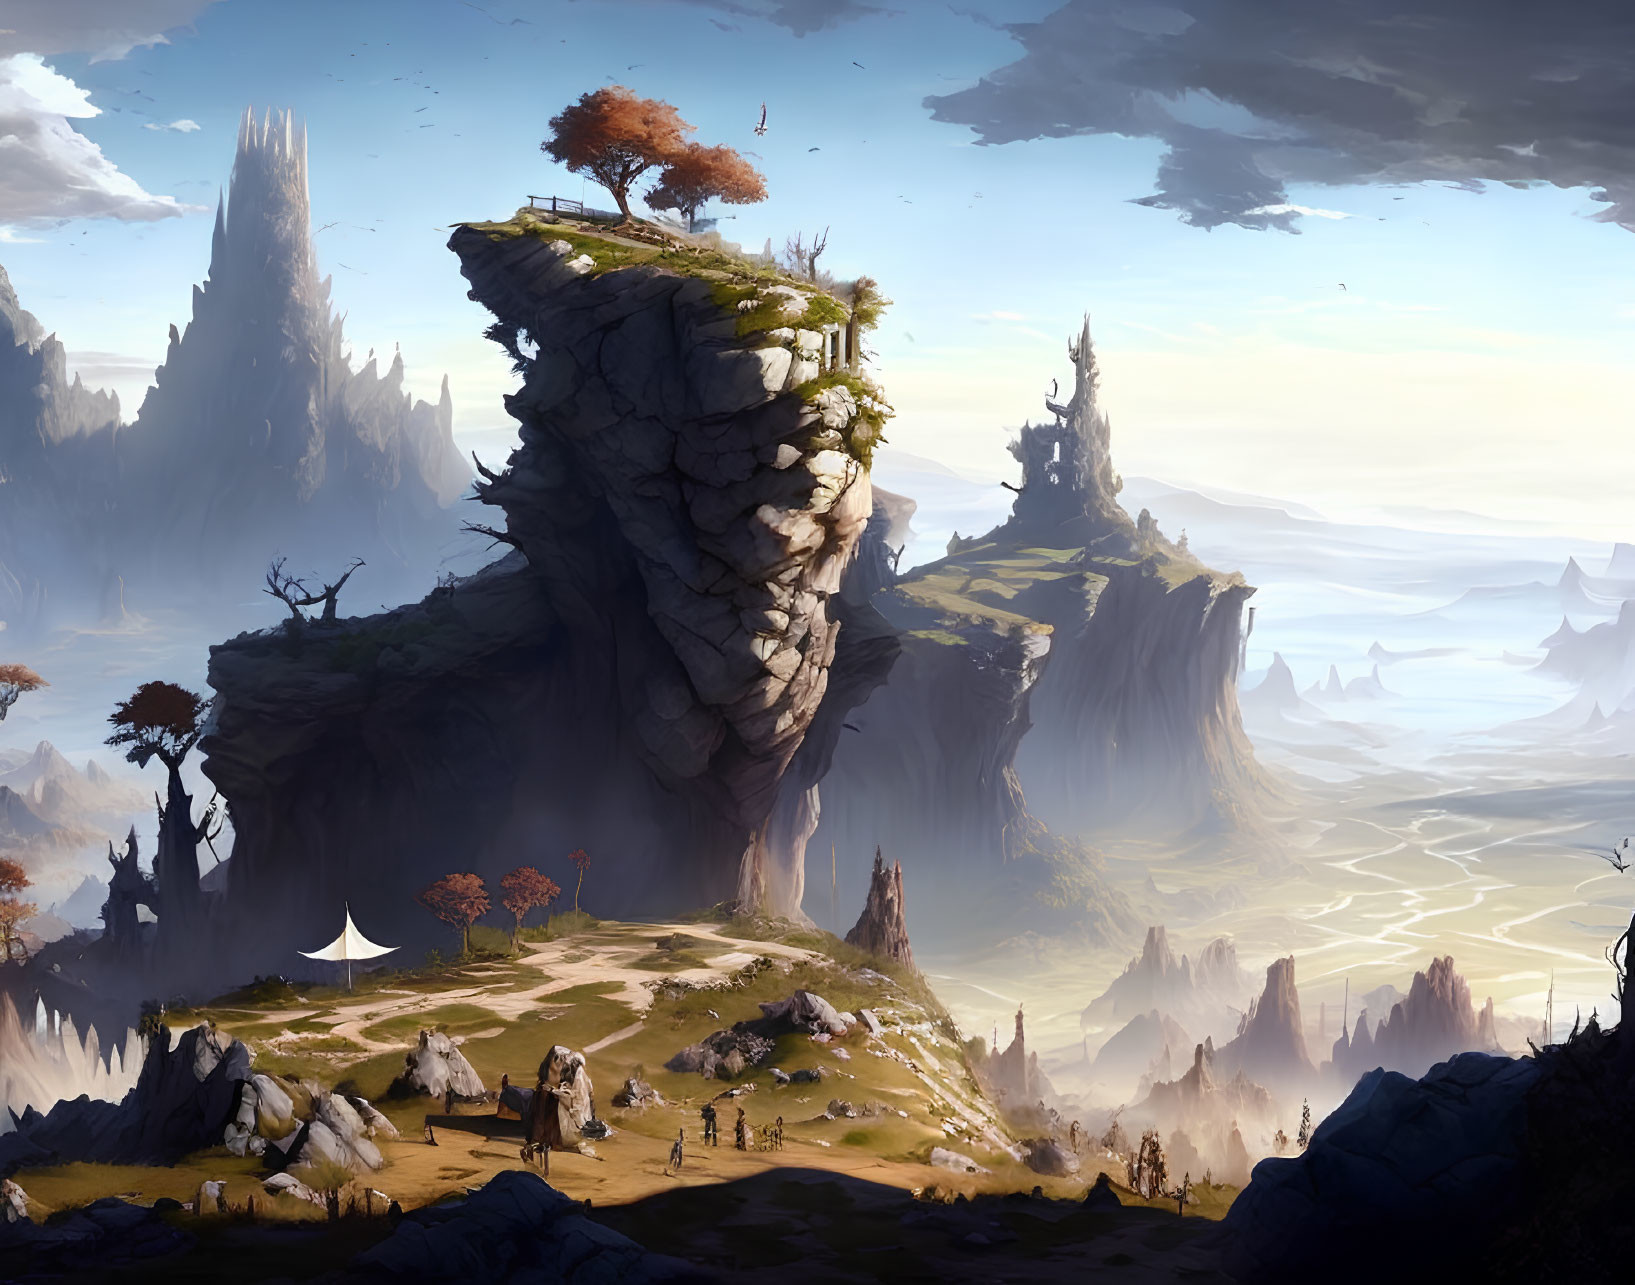 Majestic fantasy landscape with towering rock formations and a tent.